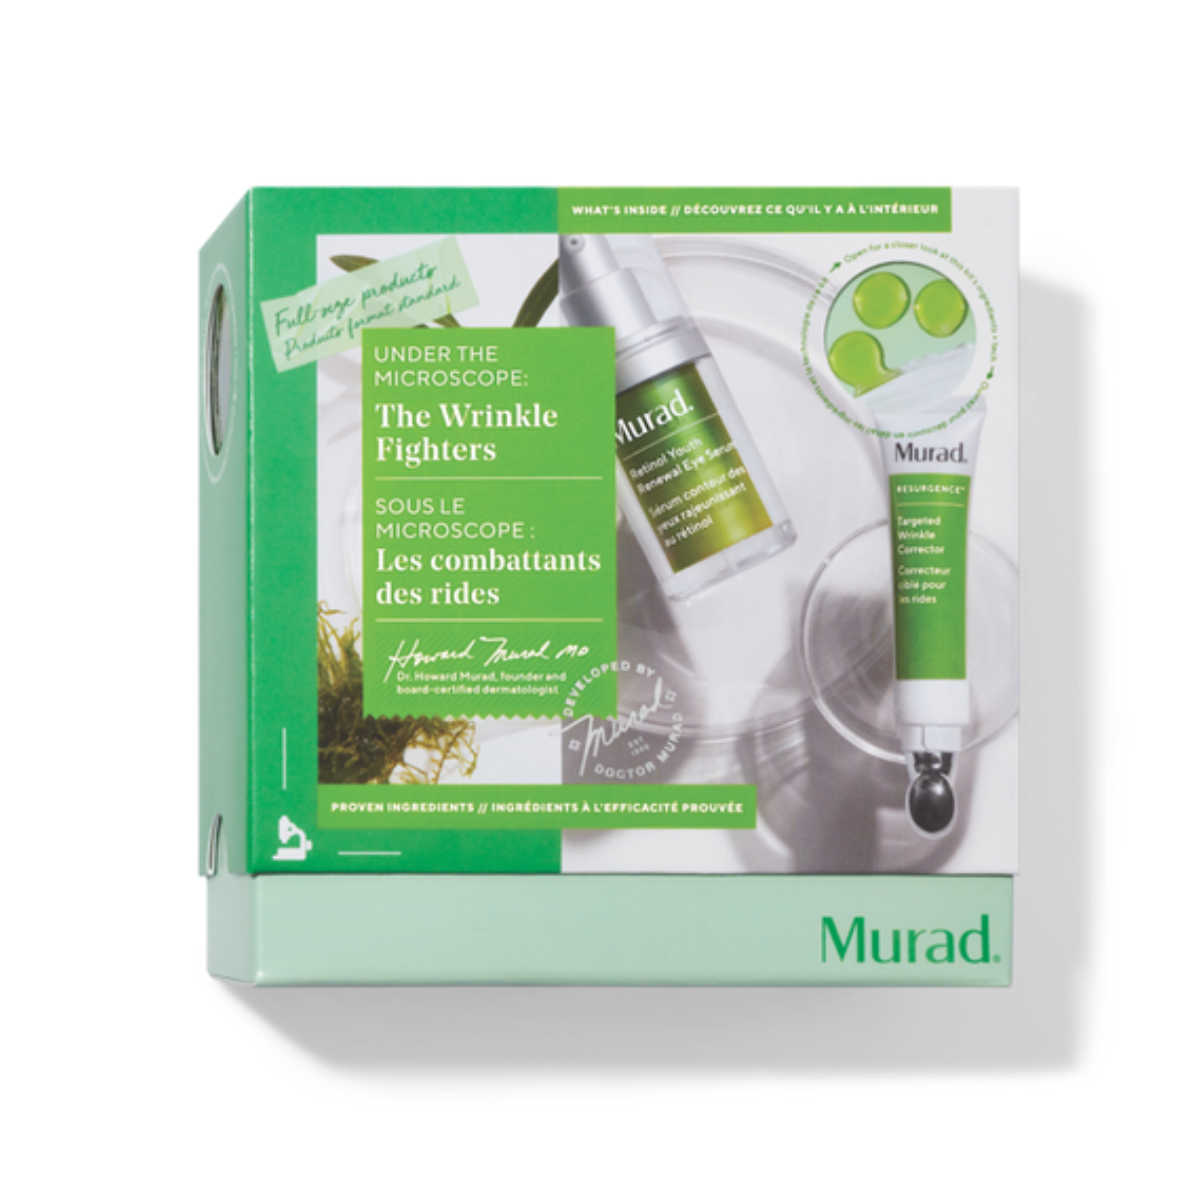 Murad Under the Microscope: The Wrinkle Fighters Gift Set.